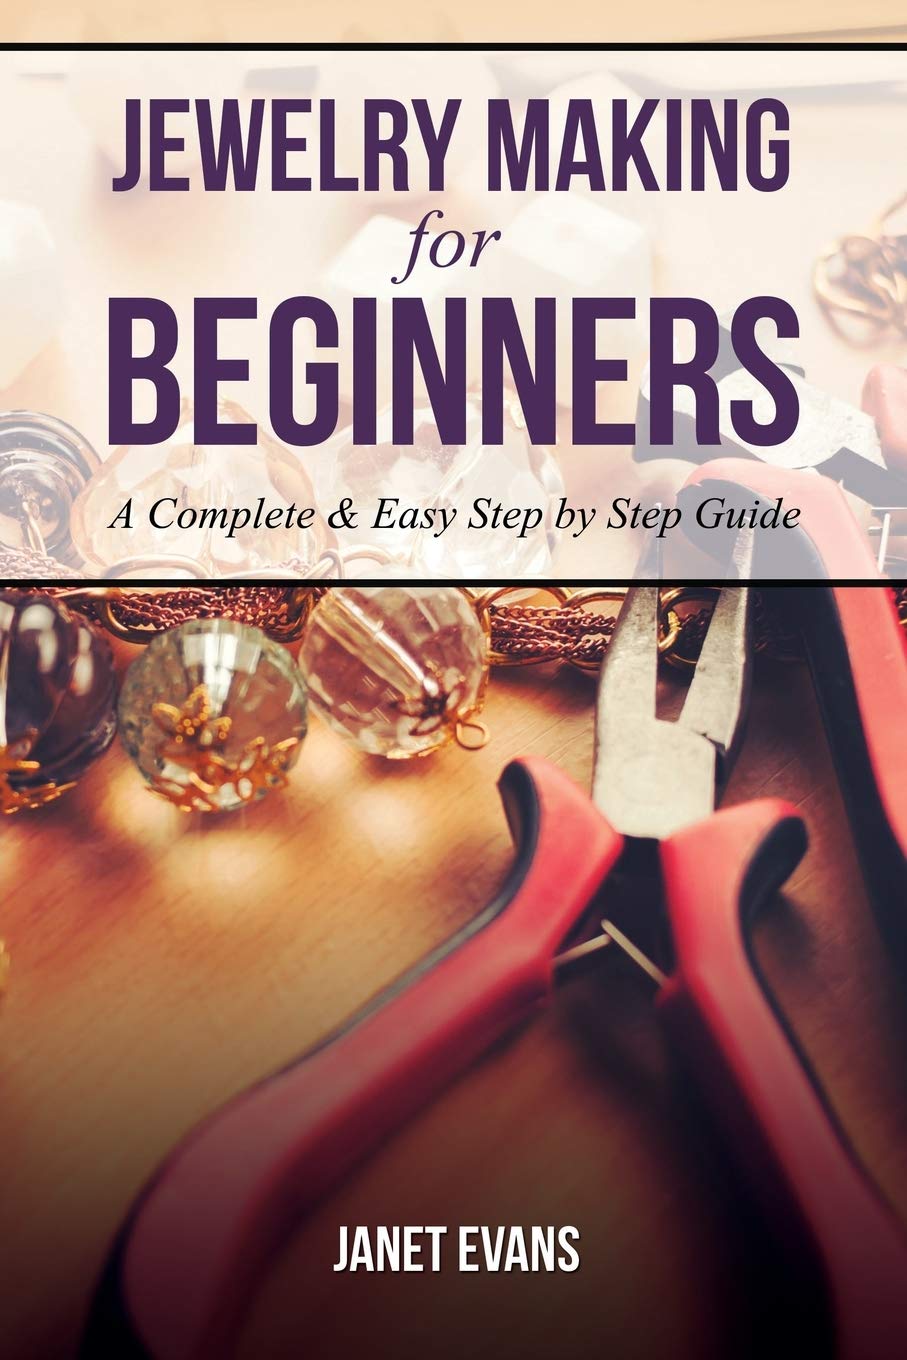 Jewelry Making for Beginners: A Complete & Easy Step by Step Guide